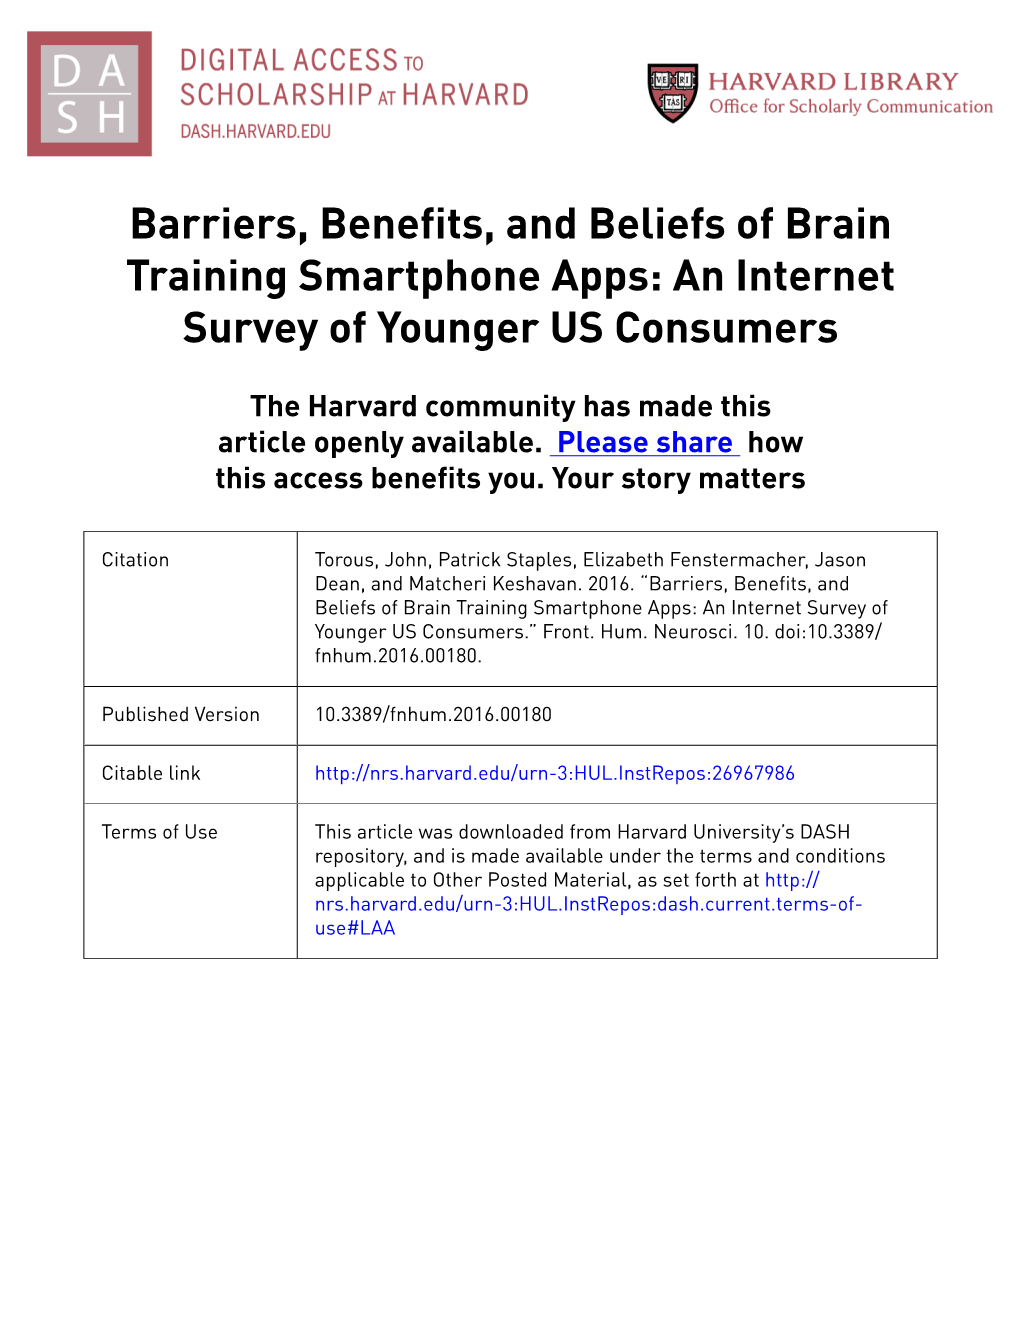 Barriers, Benefits, and Beliefs of Brain Training Smartphone Apps: an Internet Survey of Younger US Consumers